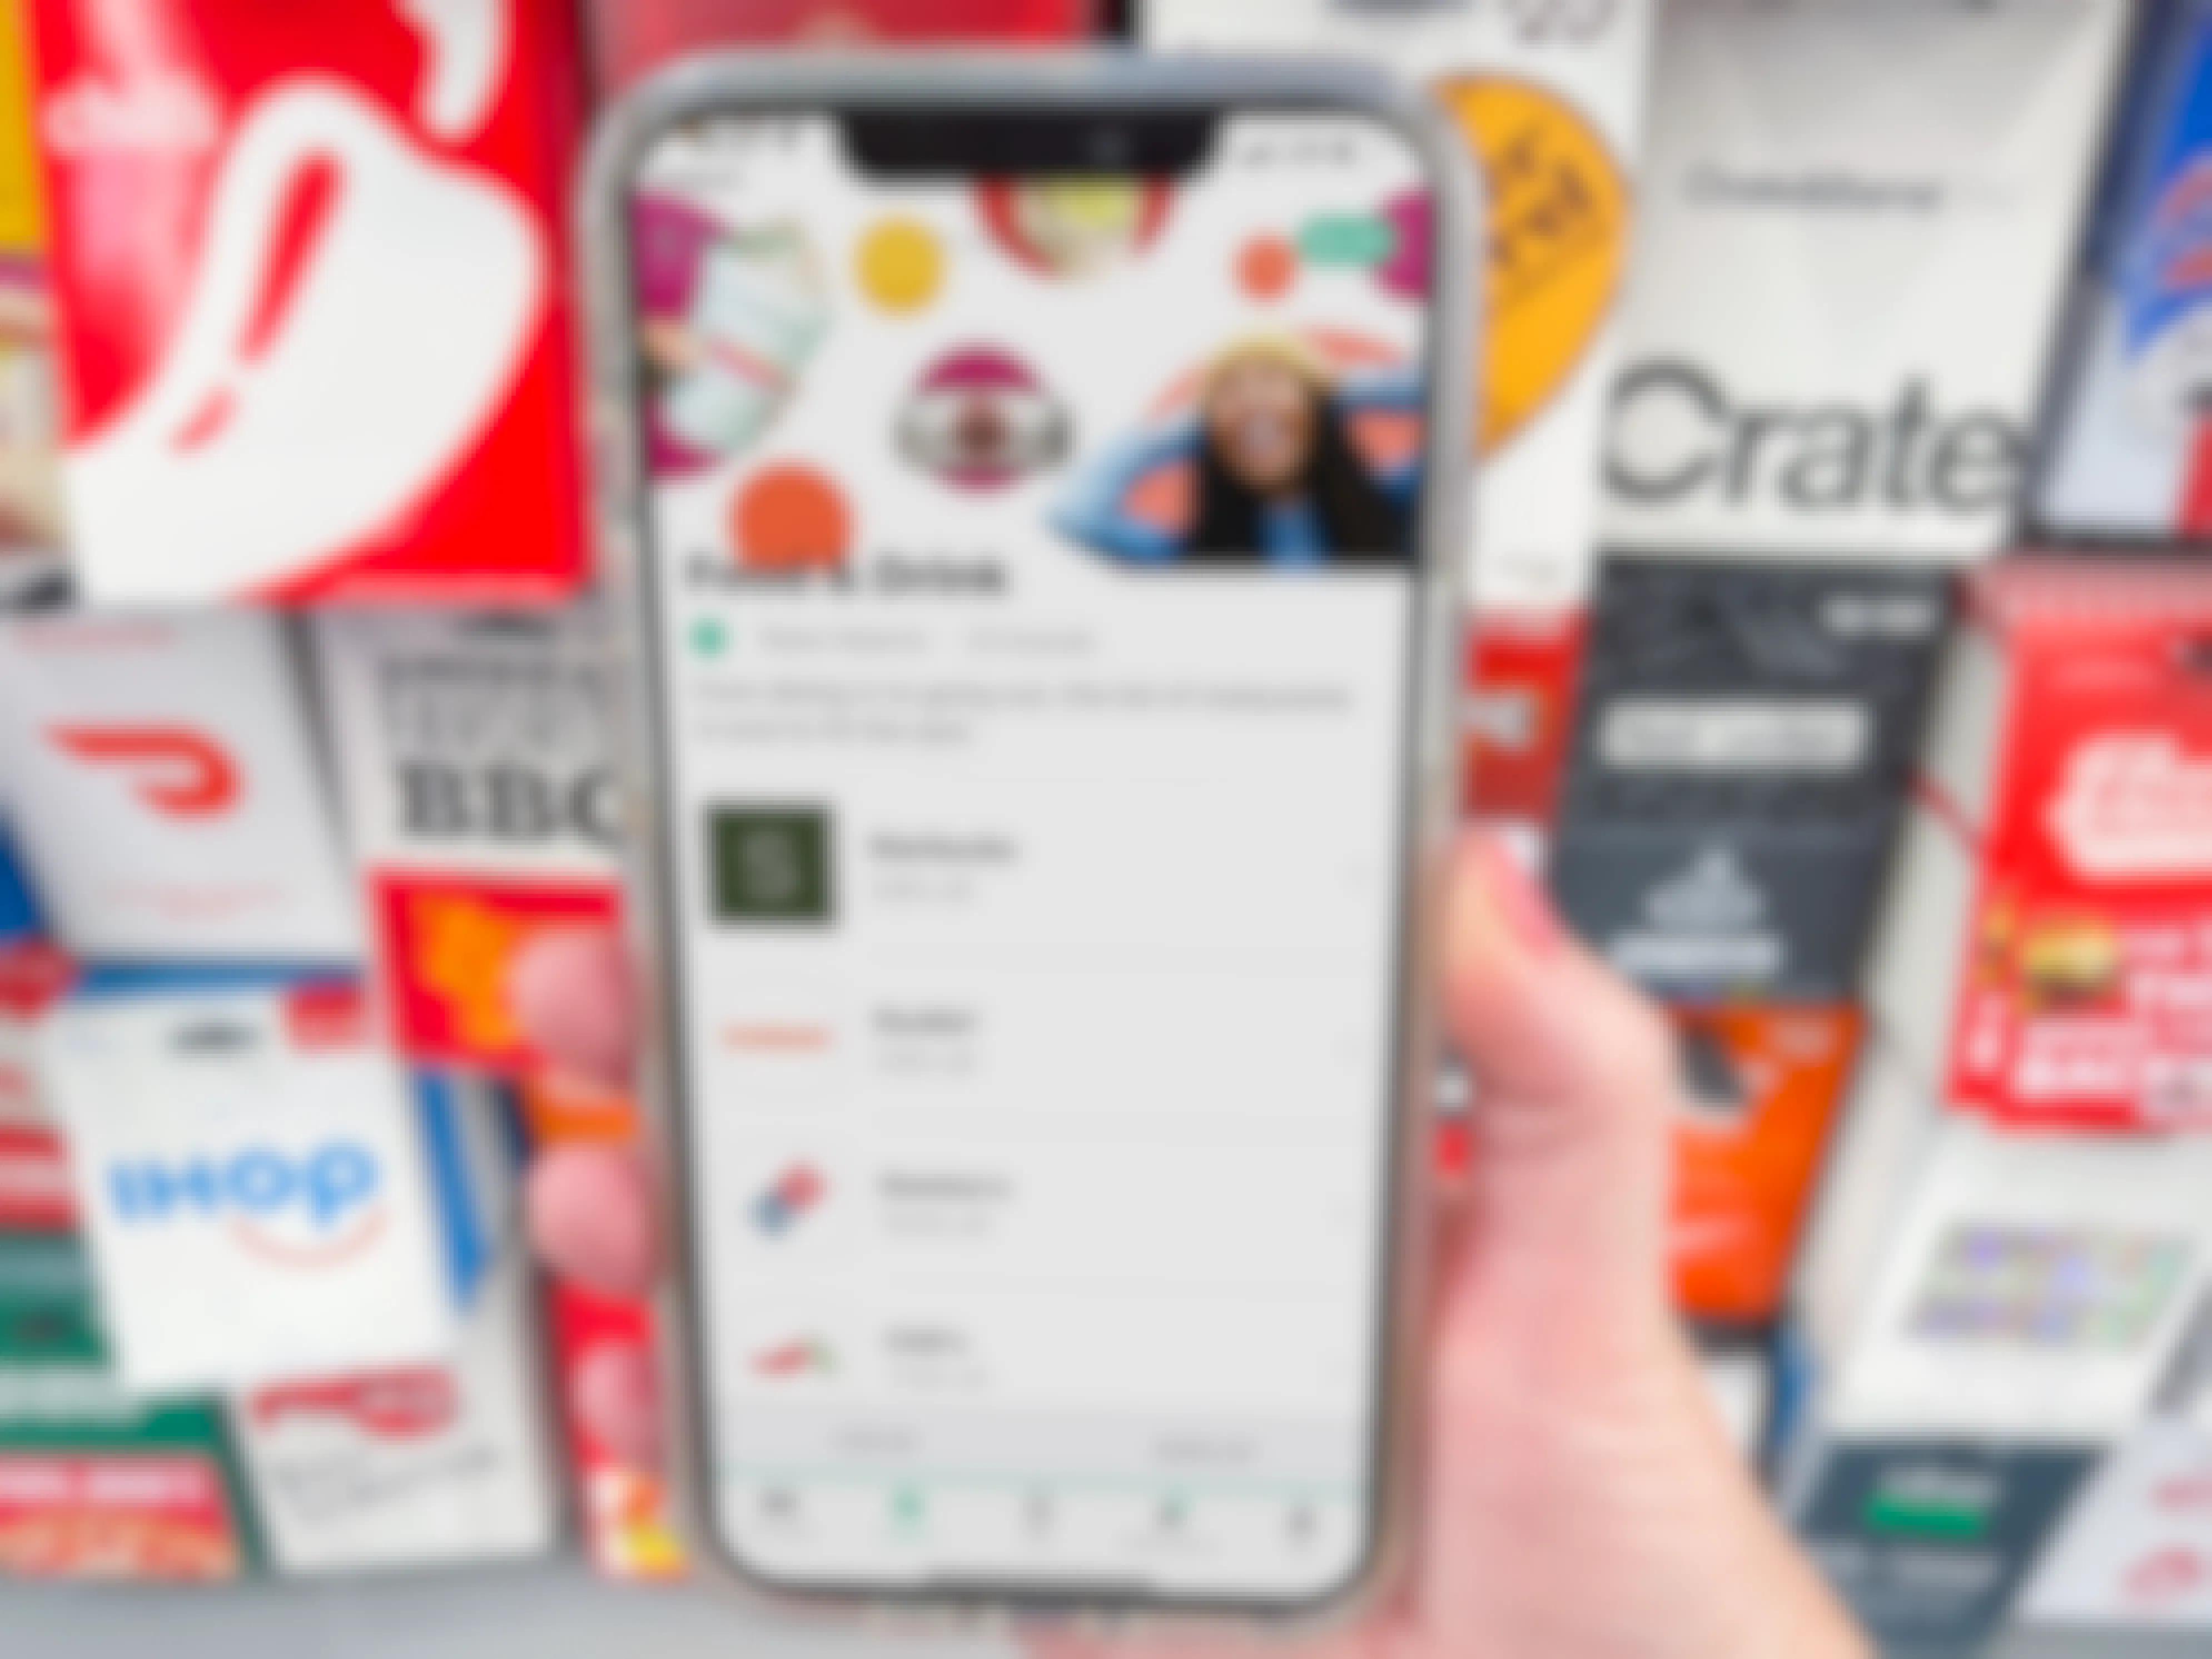 A person's hand holding an iPhone displaying the Raise app in front of a rack of gift cards.